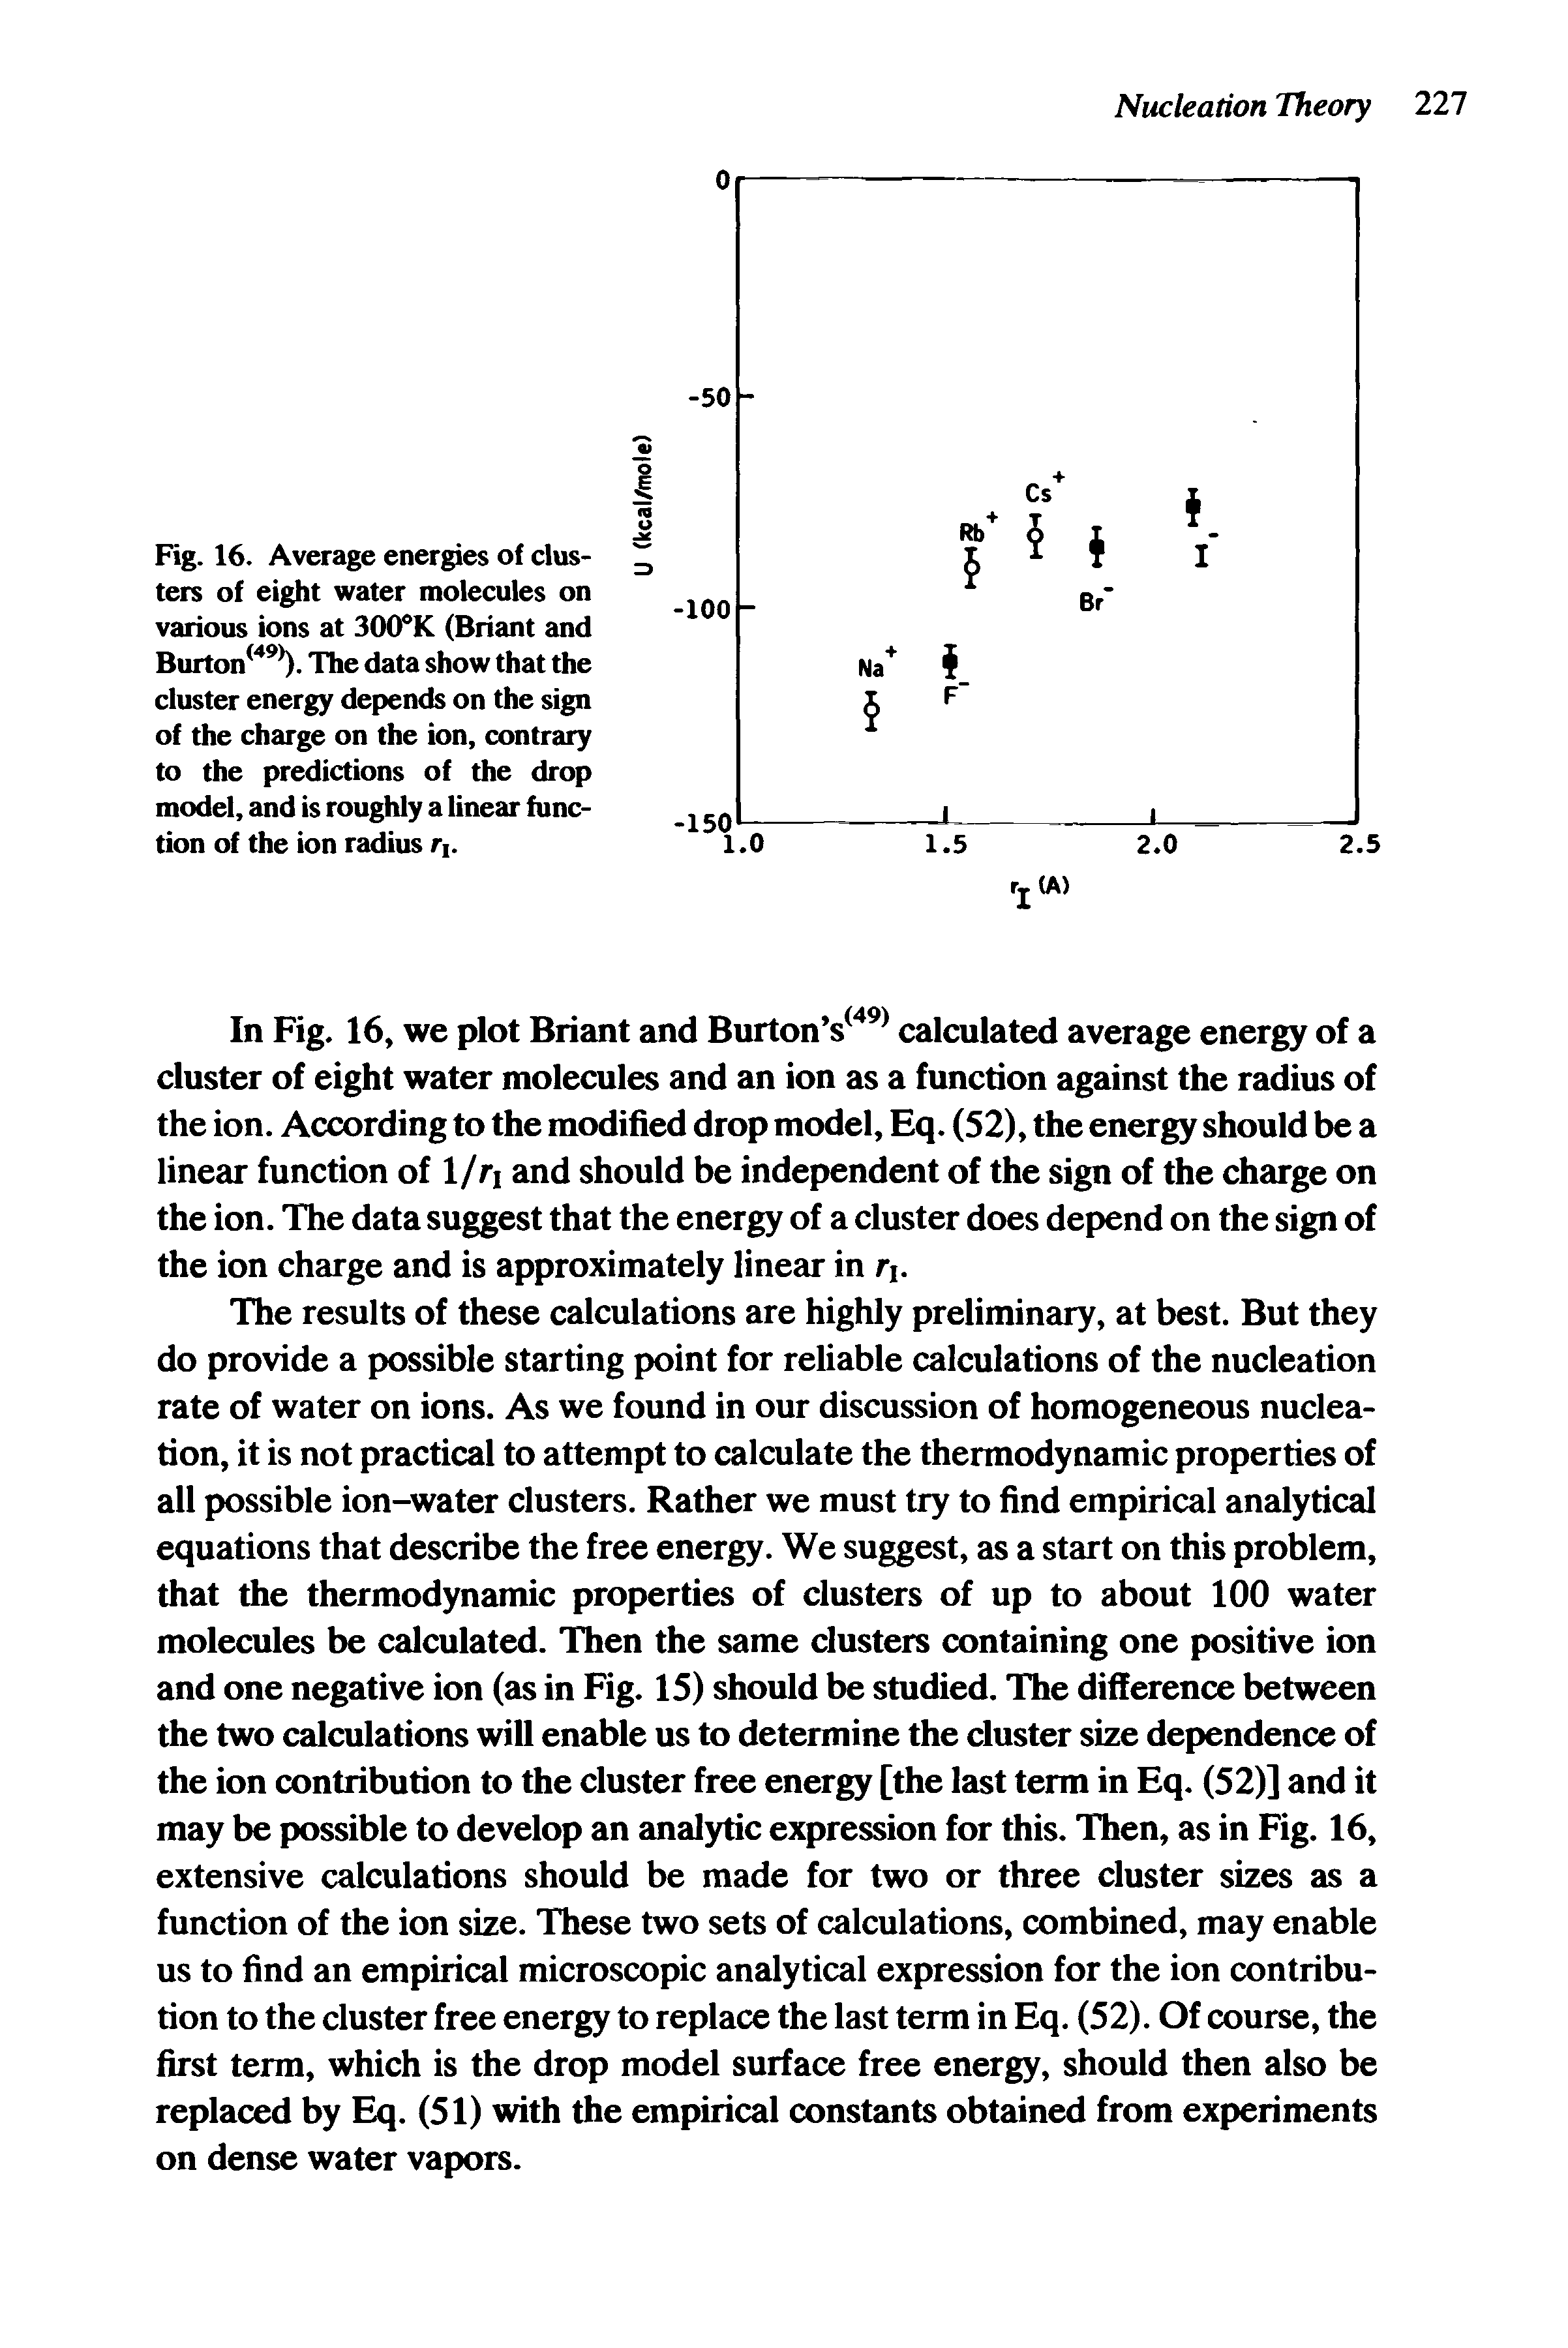 Fig. 16. Average energies of clusters of eight water molecules on various ions at 300°K (Briant and Burton . The data show that the cluster energy depends on the sign of the charge on the ion, contrary to the predictions of the drop model, and is roughly a linear function of the ion radius ri.